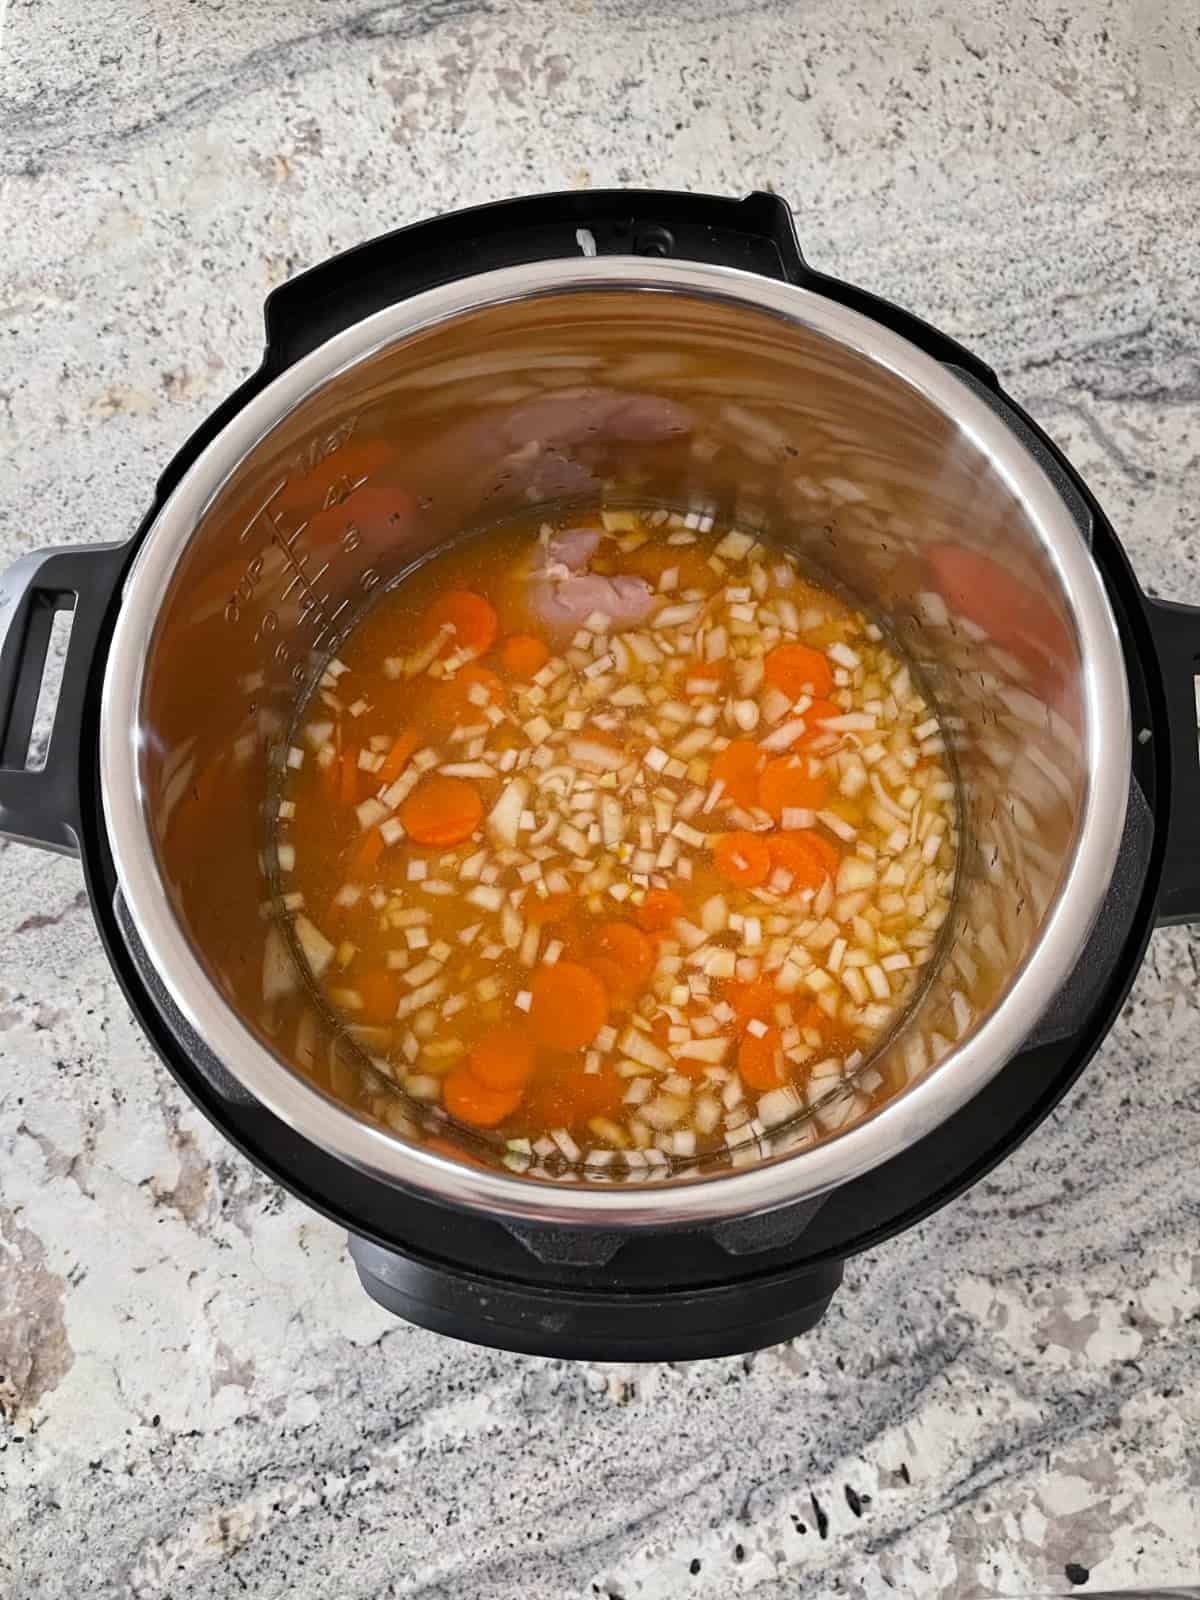 Uncooked chicken barley stew with onions and carrots in instant pot.